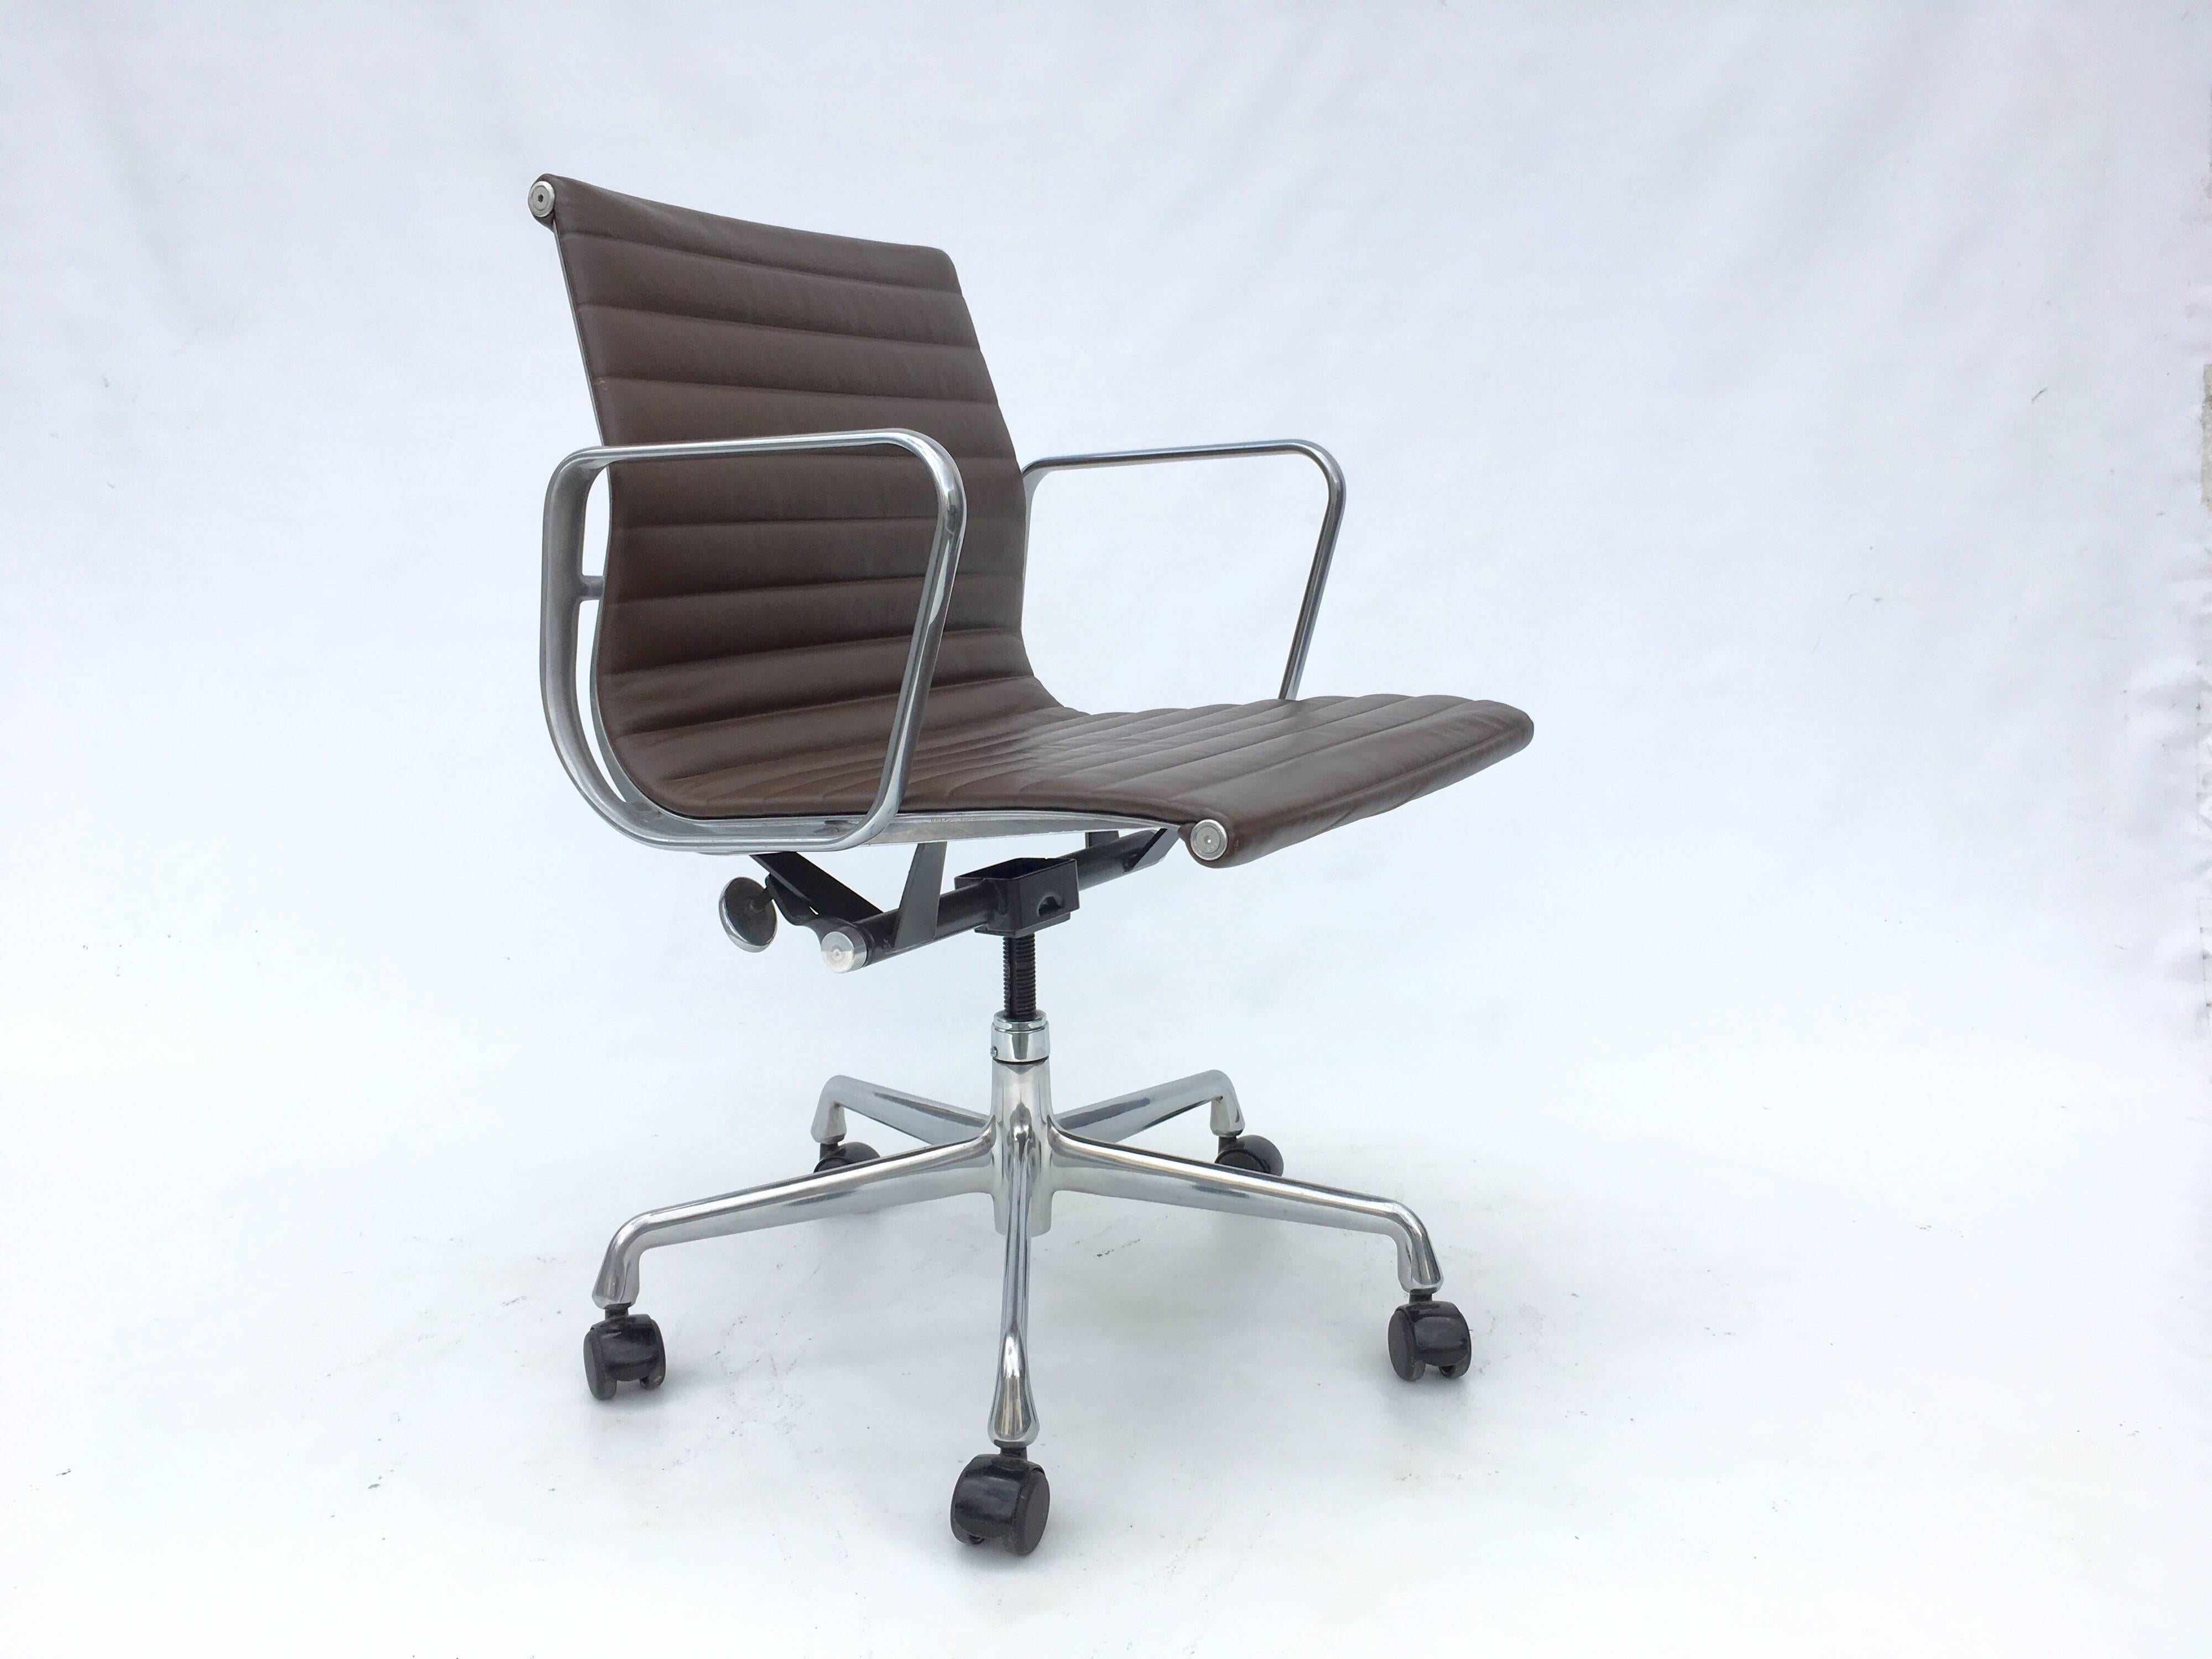 Eames aluminium management chairs in brown leather for Herman Miller. Chairs are from 2006 and have some light normal wear. These chairs are great for office or home, Manual seat-height adjustment from 17